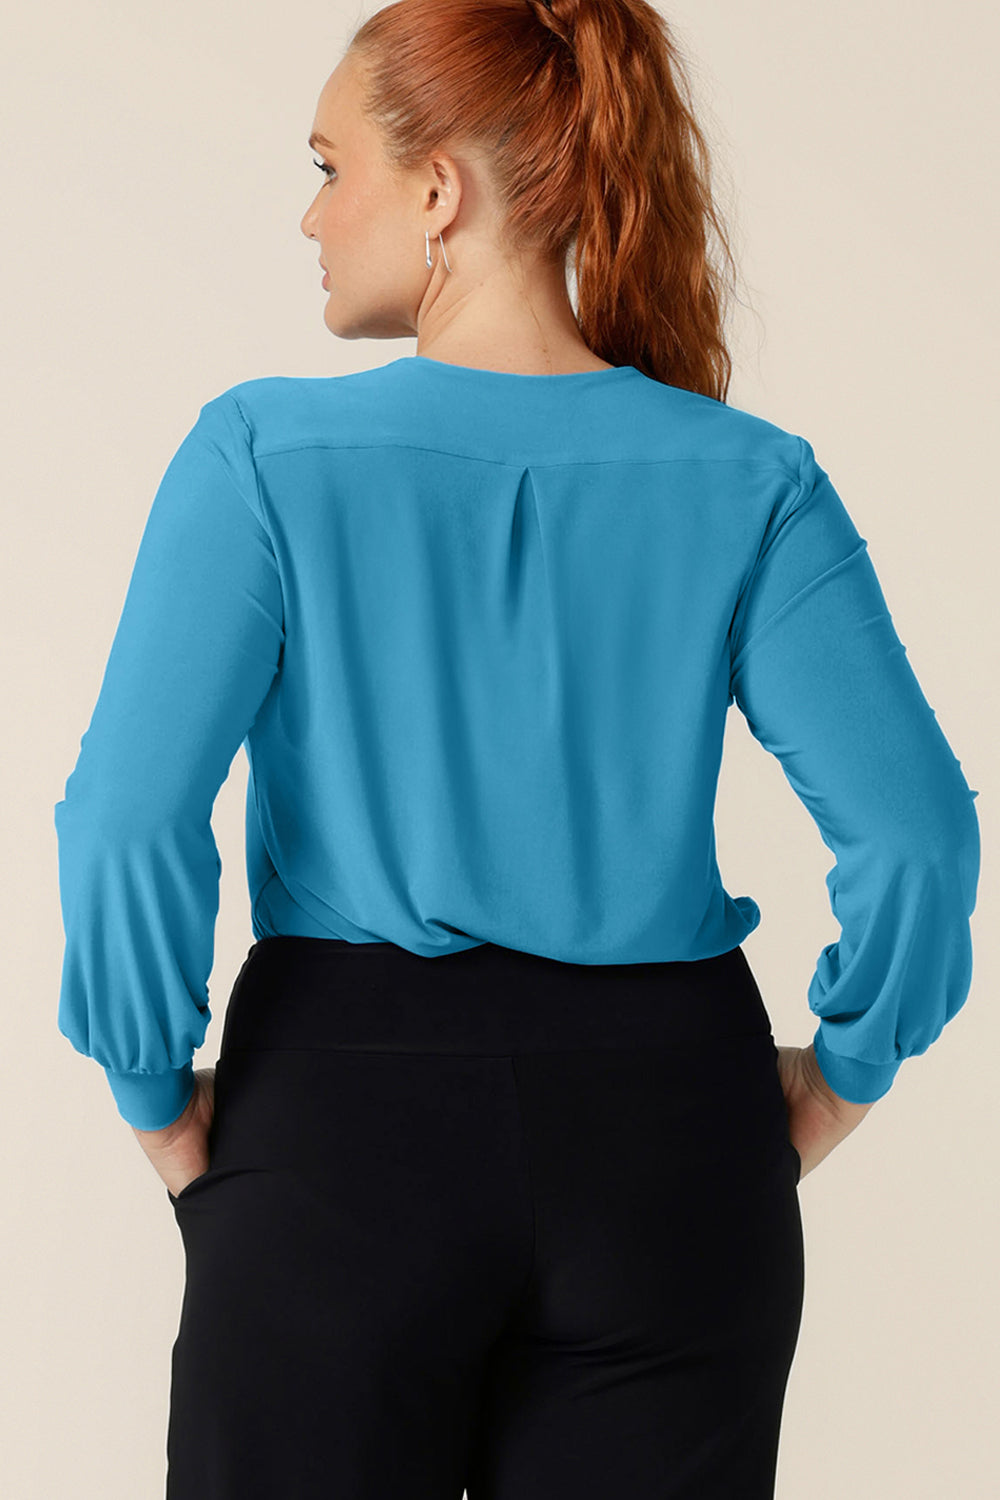 Back view of a curvy woman wearing a V-neck top with long bishop sleeves in Opal blue stretch jersey. Made in Australia by Australian and New Zealand women's clothing label, L&F, this workwear top is available to shop (with free shipping to New Zealand) in an inclusive size range of sizes 8 to 24.